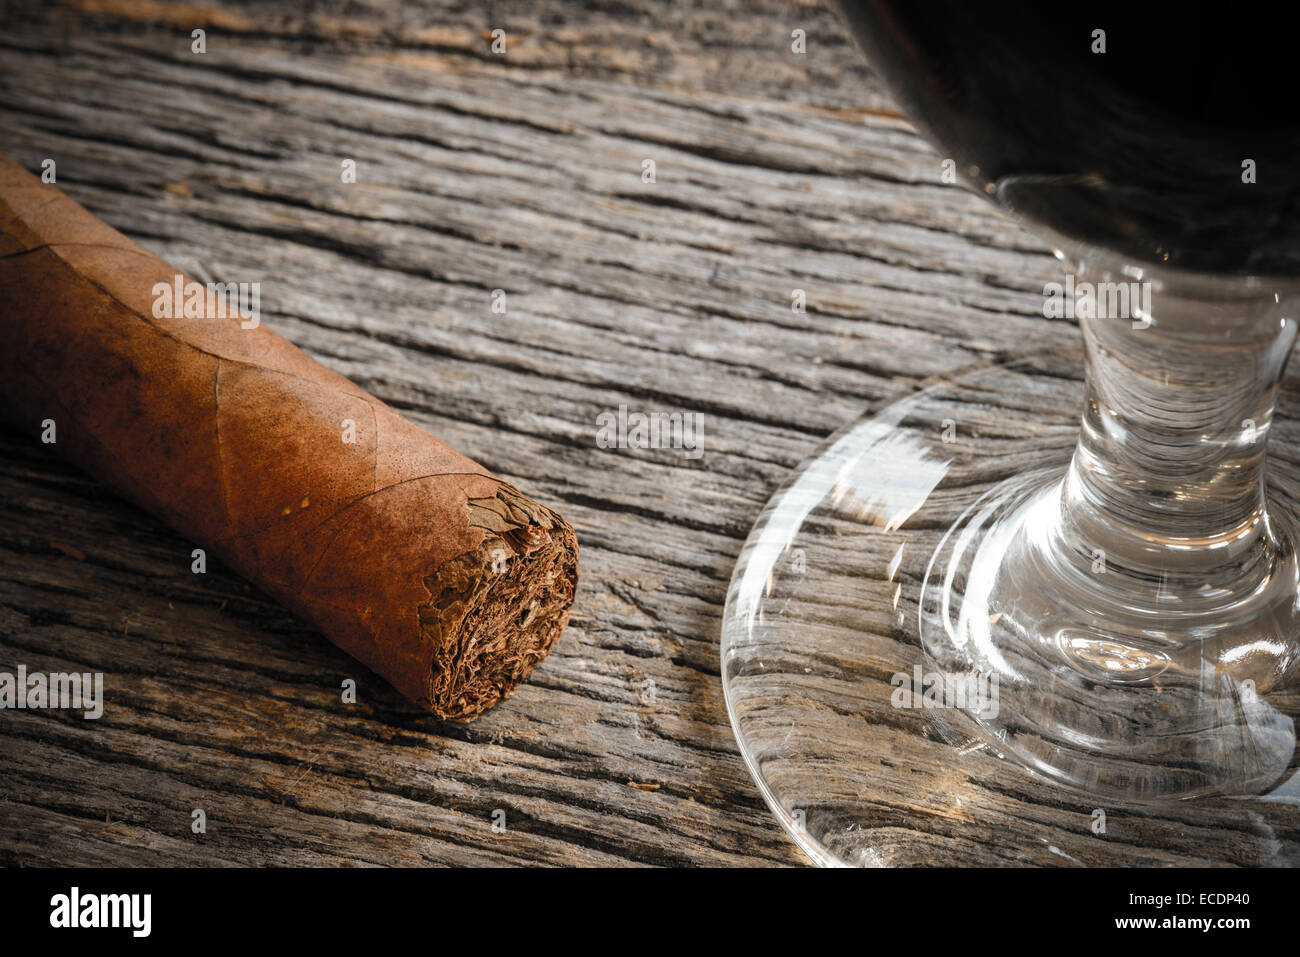 Cigar with Glass of red wine on Wooden Background Stock Photo